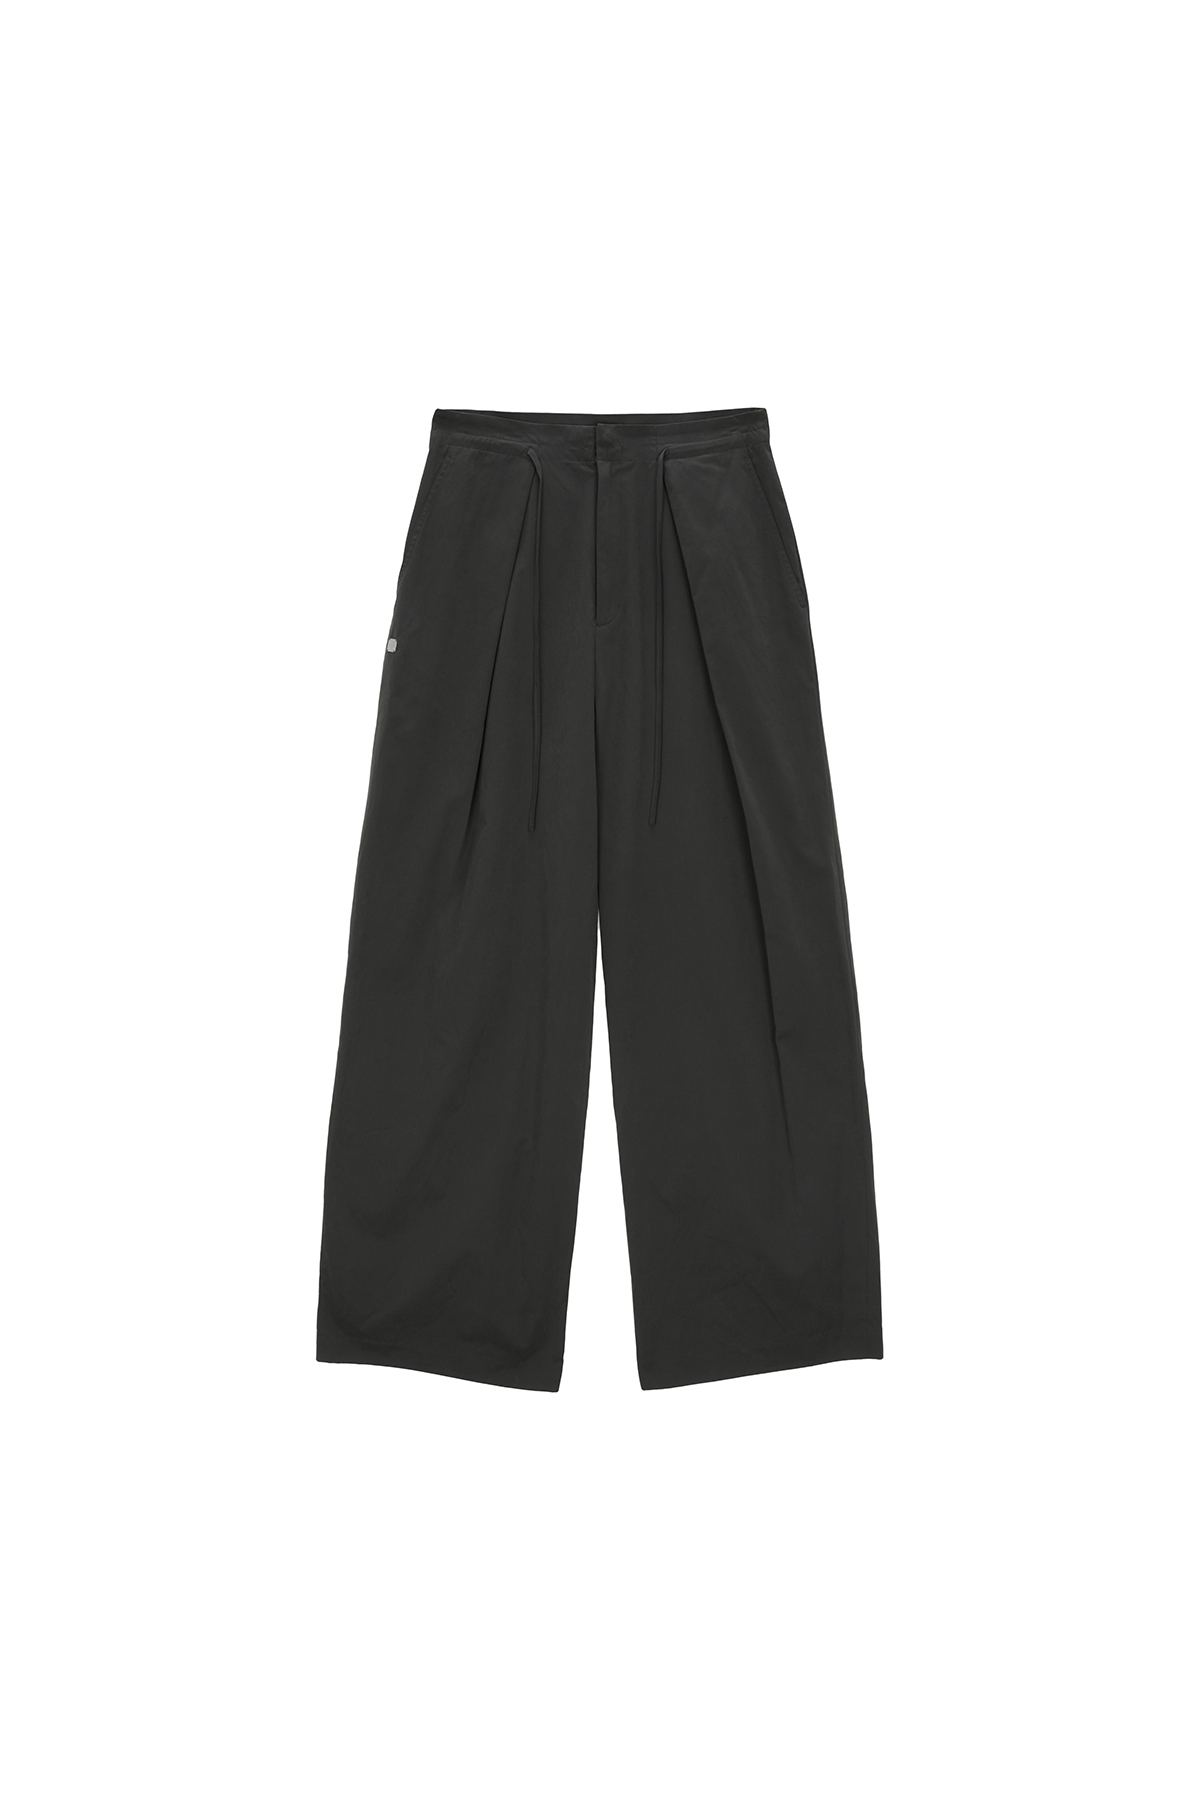 DRAW STRING WIDE PANTS IN CHARCOAL